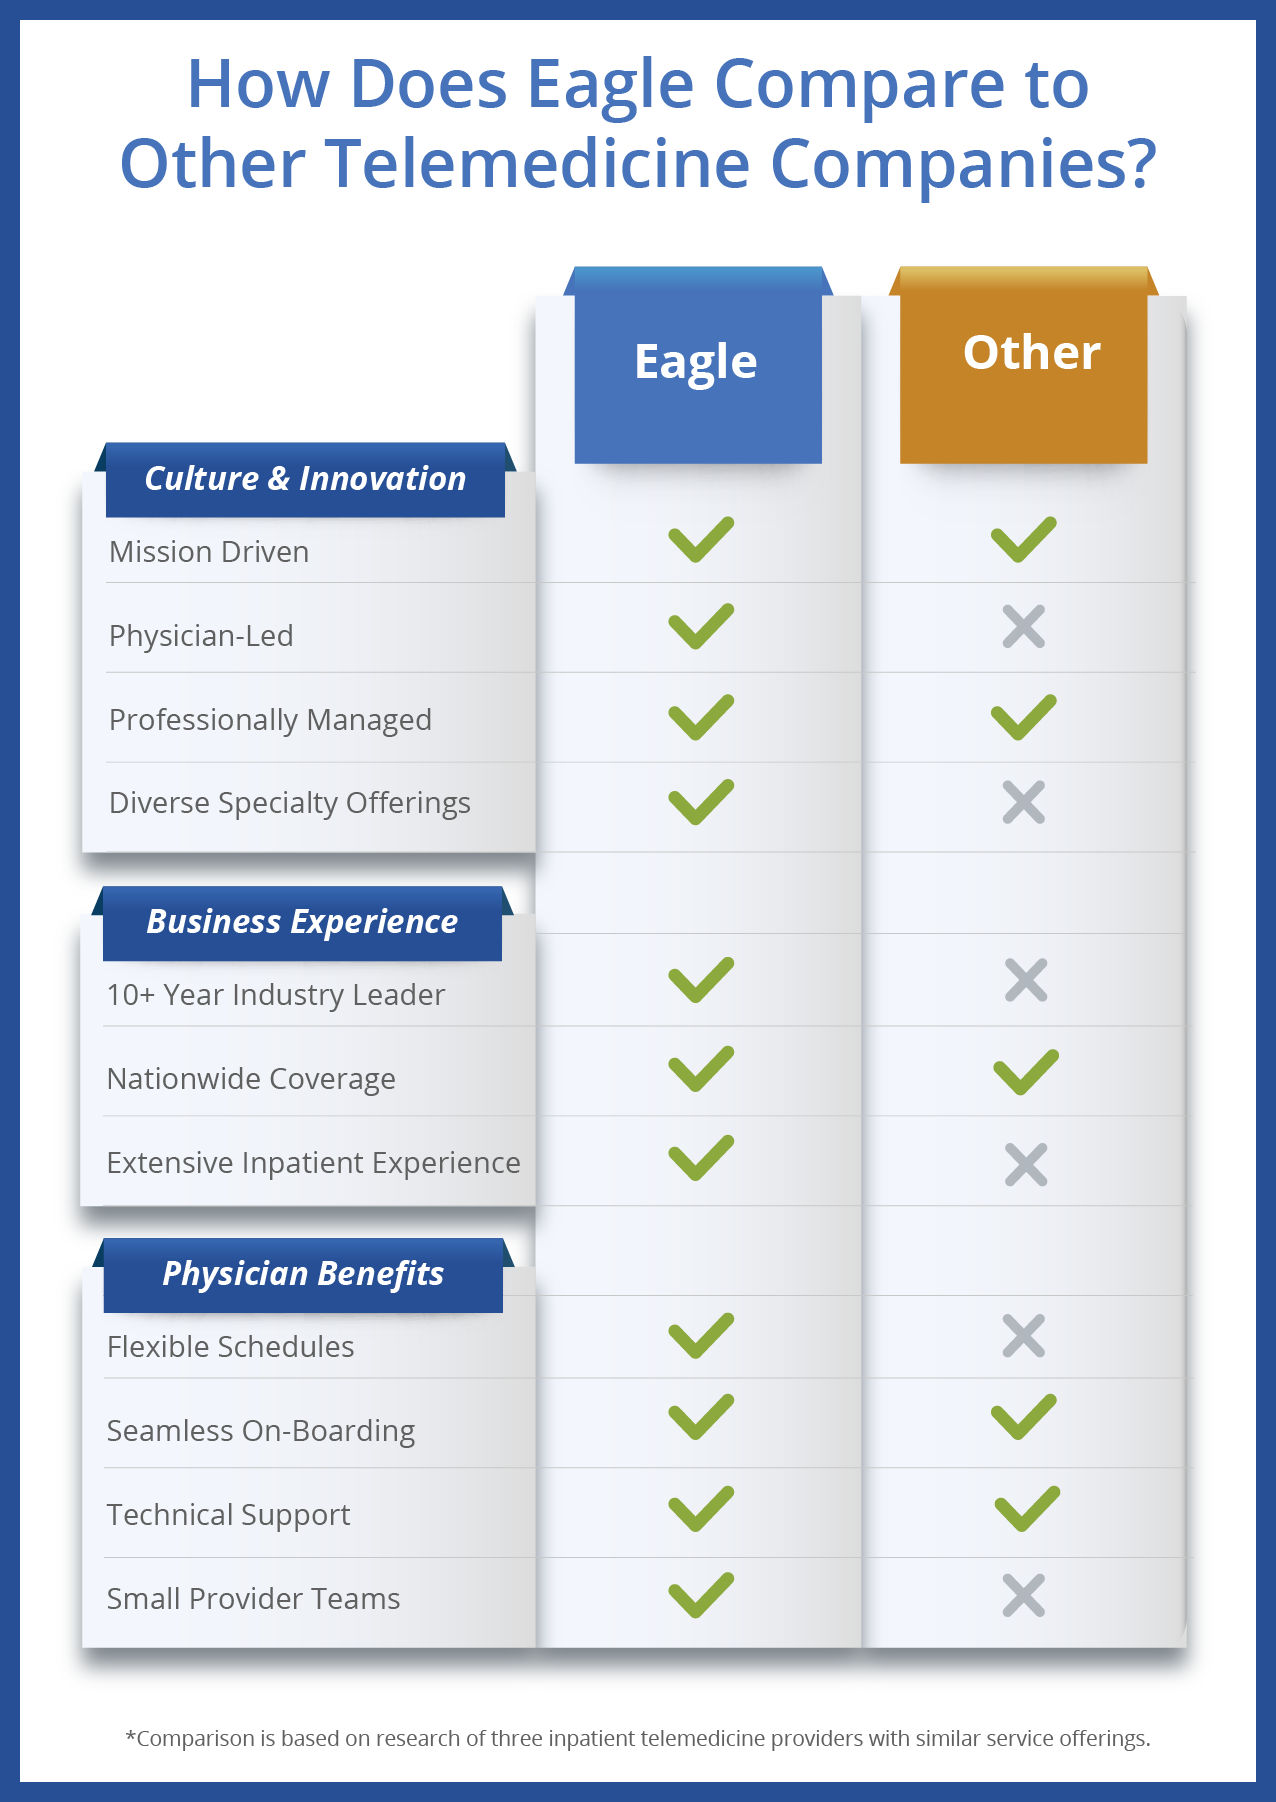 How Does Eagle Compare to Other Telemedicine Companies?